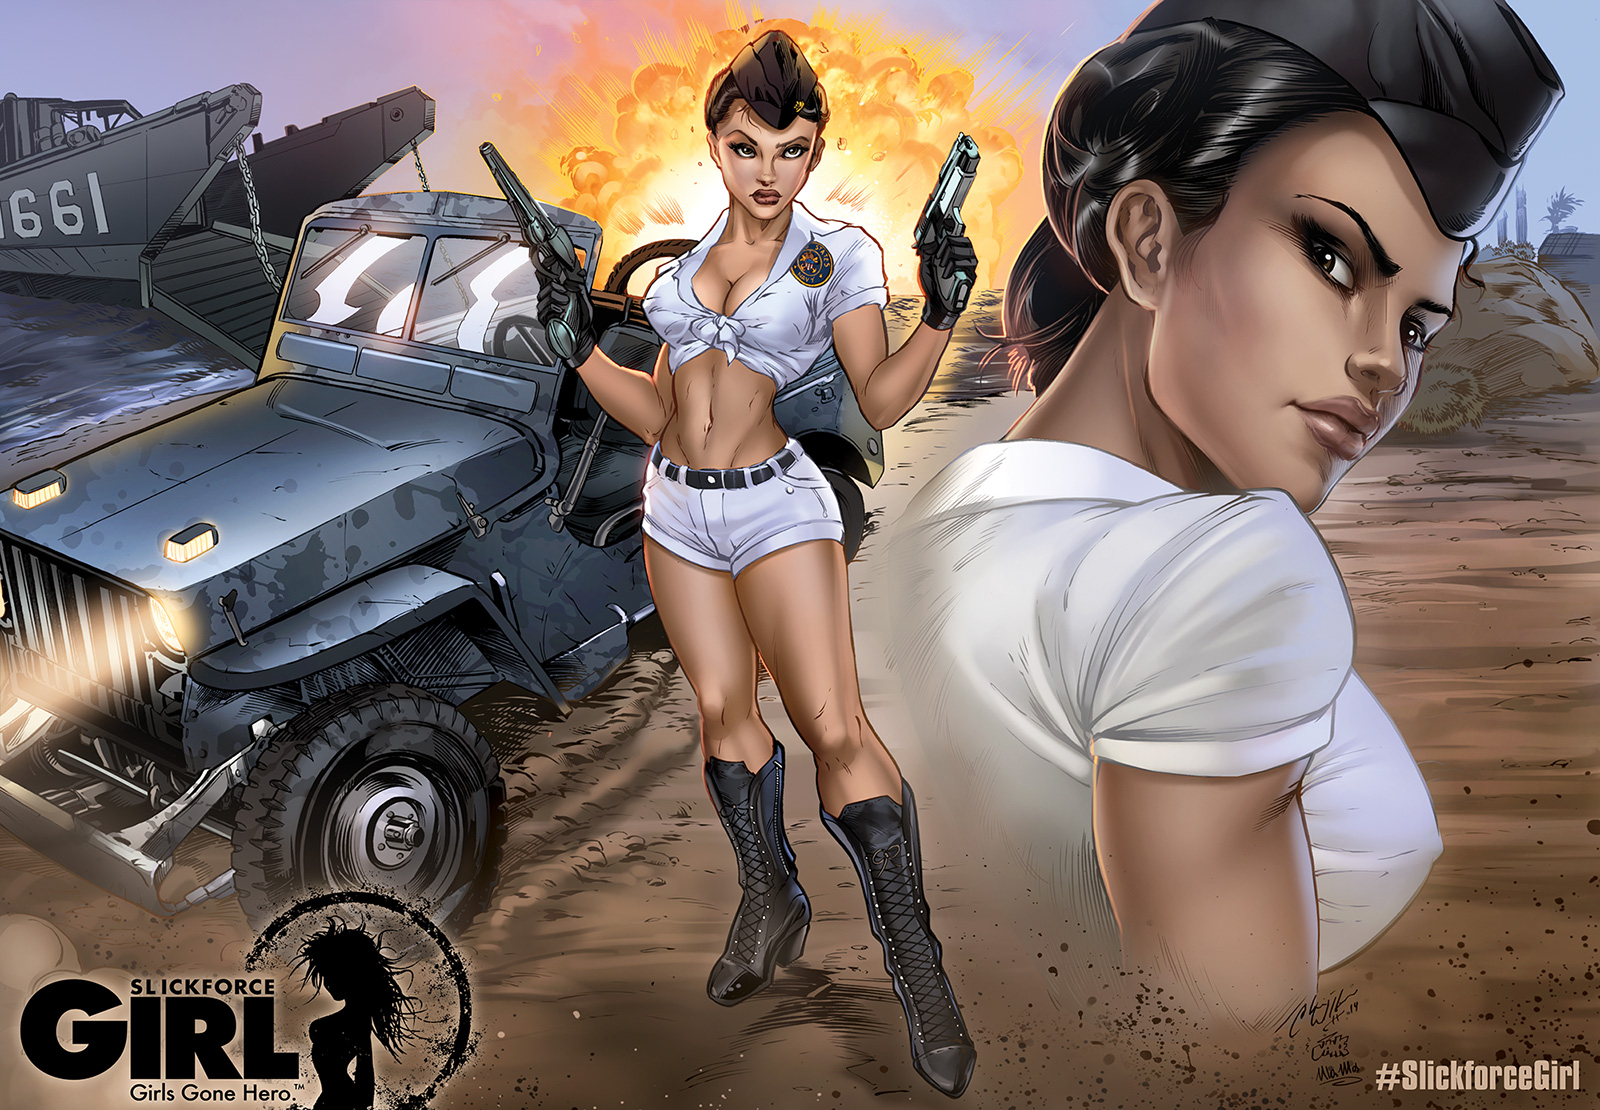 Commander Brittany by Chris Williams and Ula Mos.